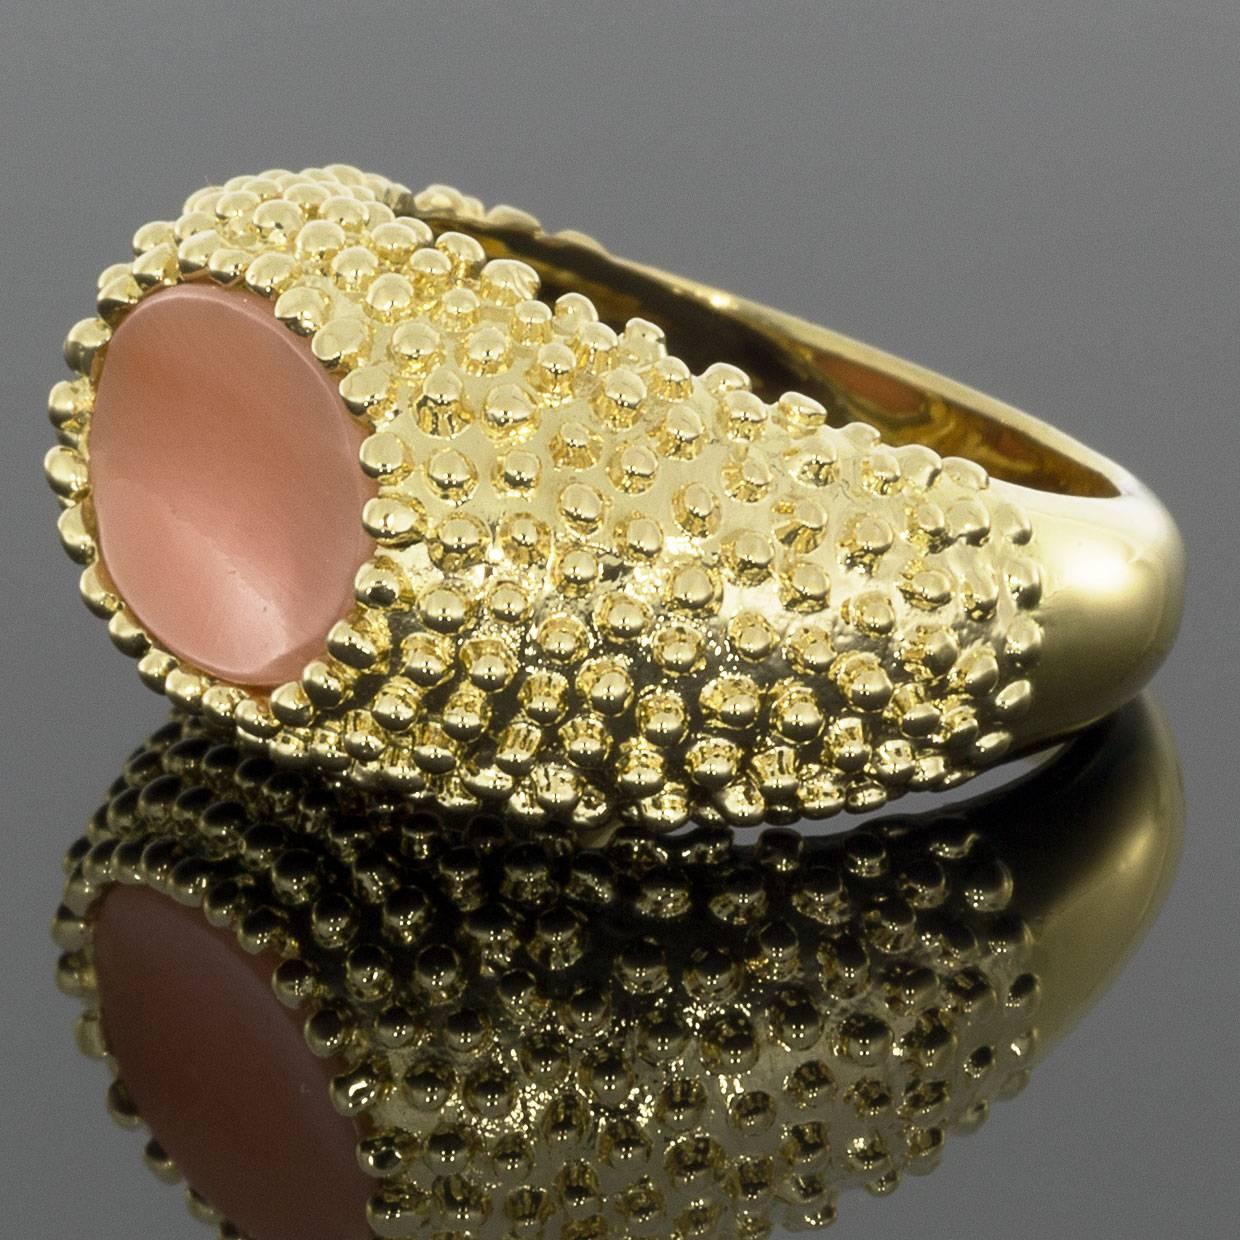 Boucheron is a French family-owned jewelry house located in Paris. This 18K yellow gold ring is bezel set with a beautiful coral stone. This ring will arrive in its original Boucheron box.

DETAILS
18K Yellow Gold
Coral Bezel set 
MSRP $3,650
Size